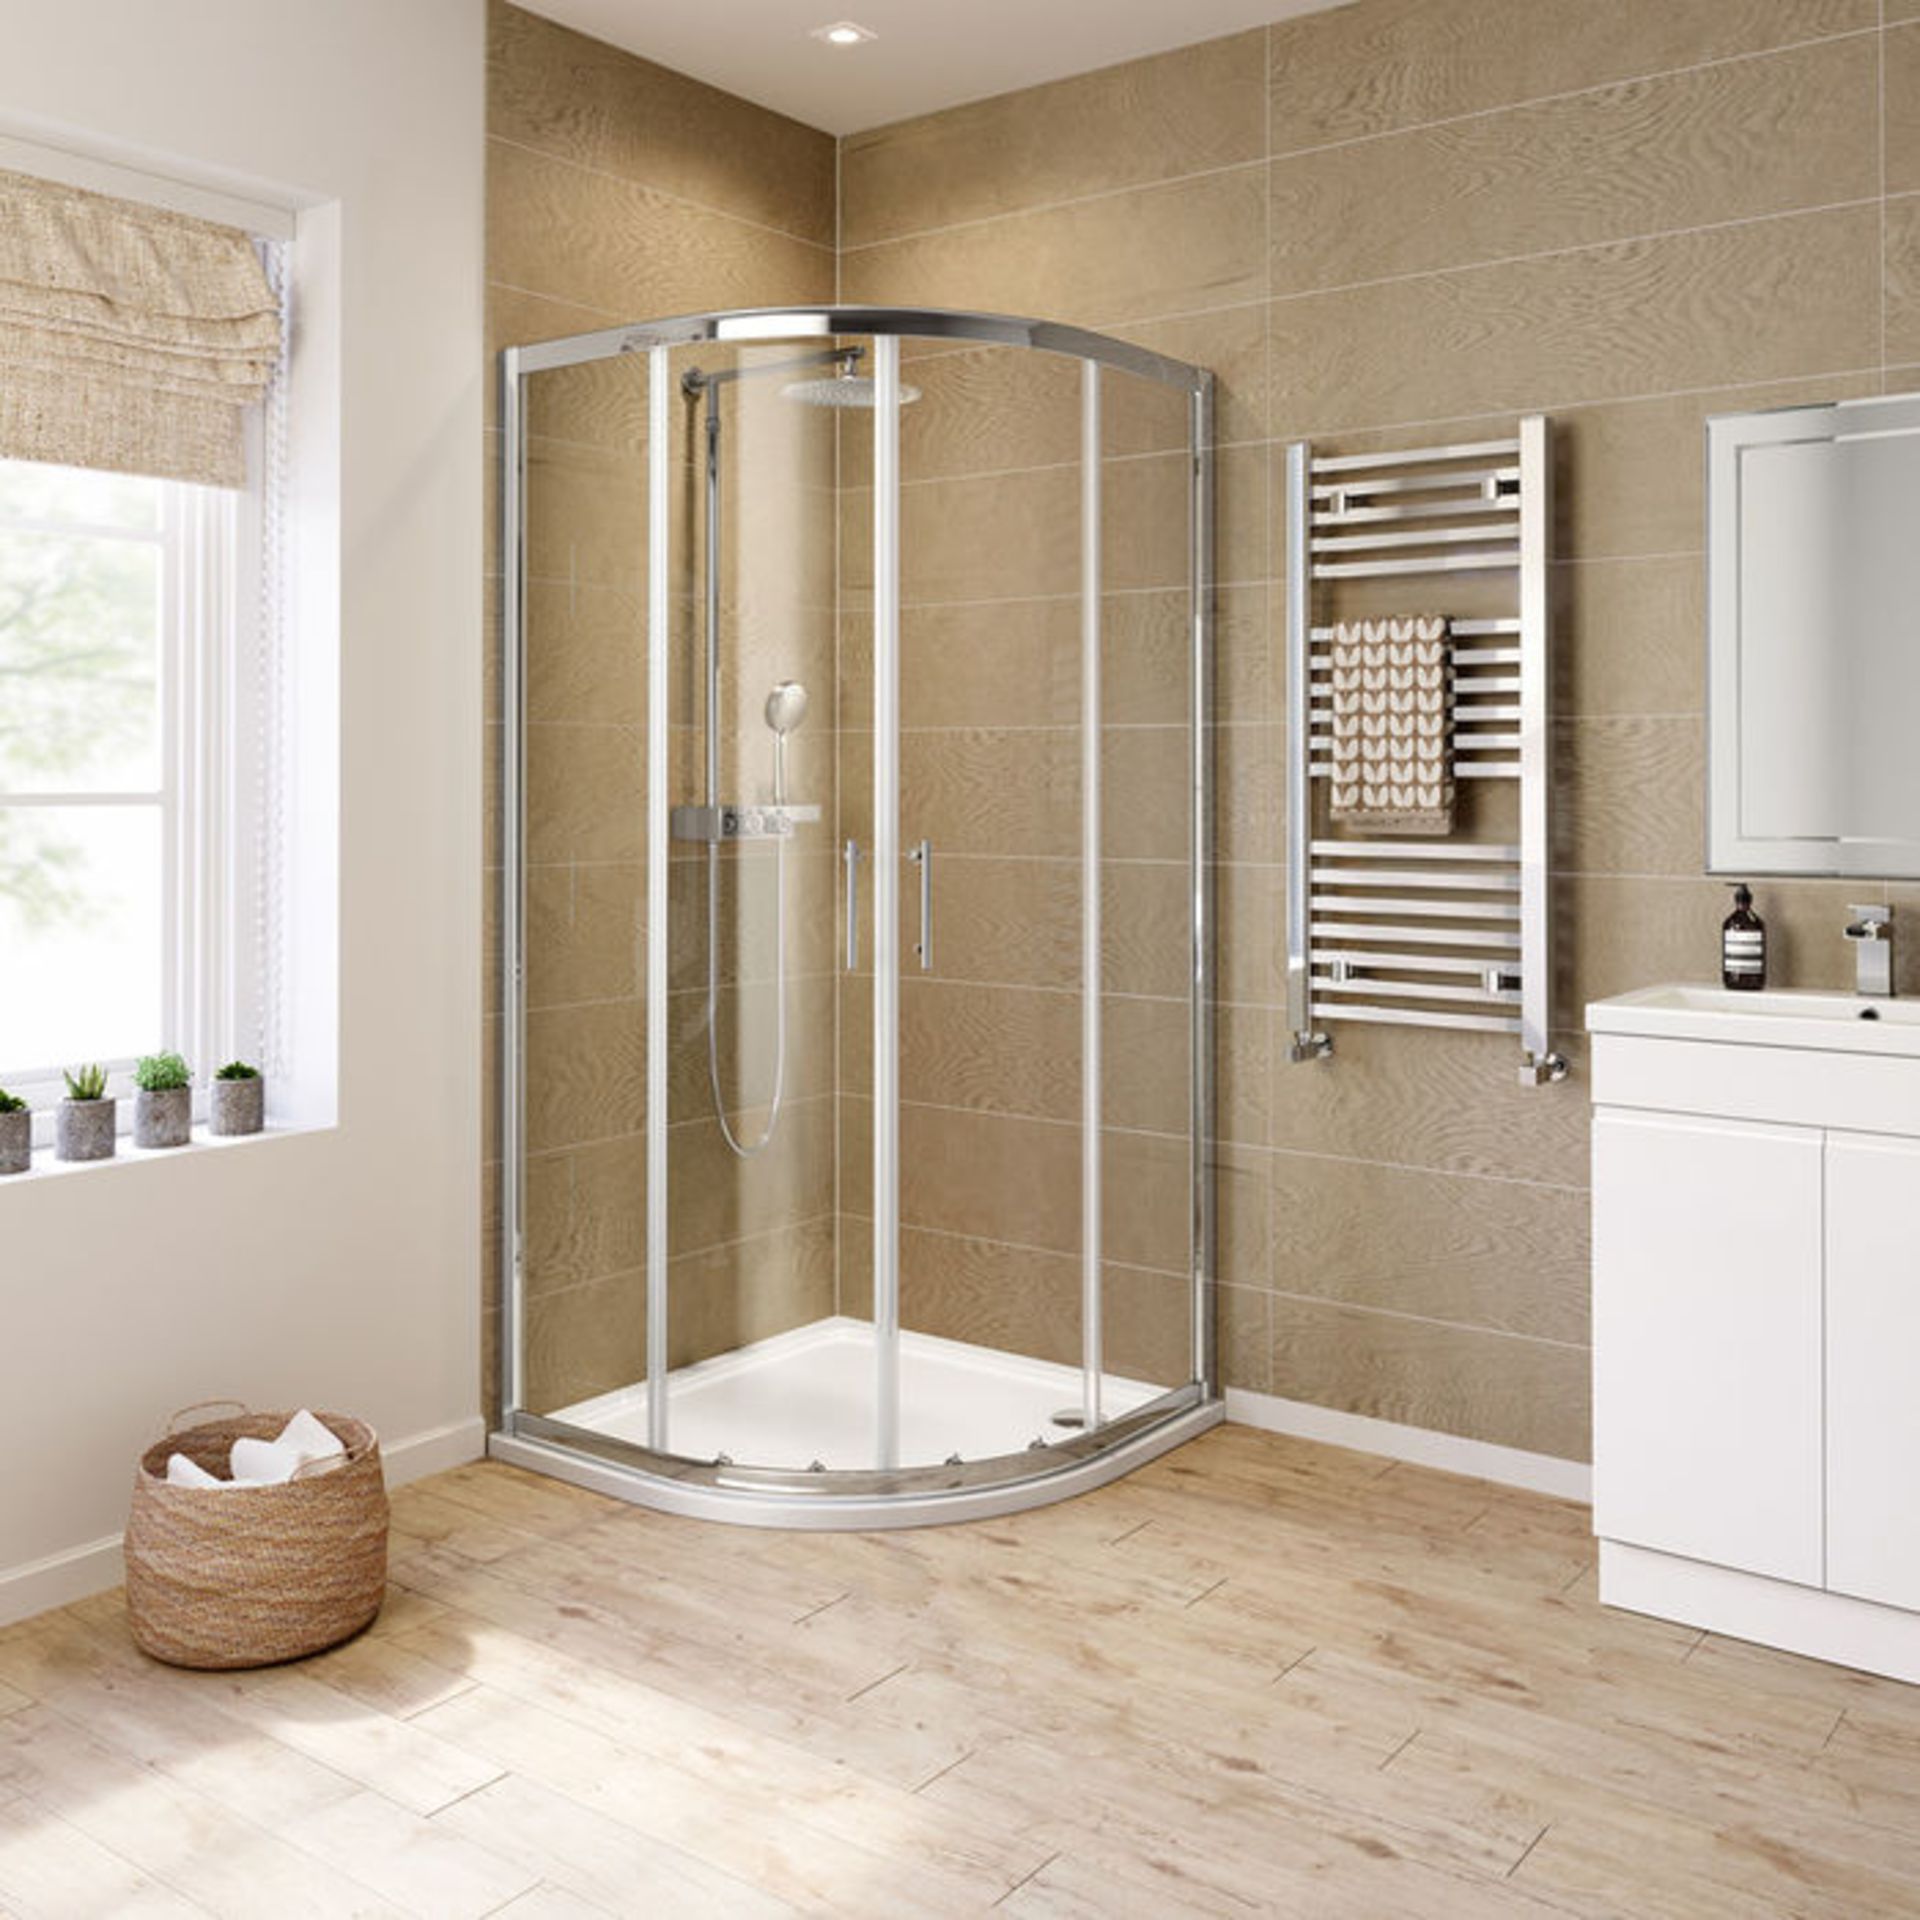 (ND219) 900x900mm - 6mm - Elements Quadrant Shower Enclosure. 6mm Safety Glass Fully waterproof - Image 4 of 4